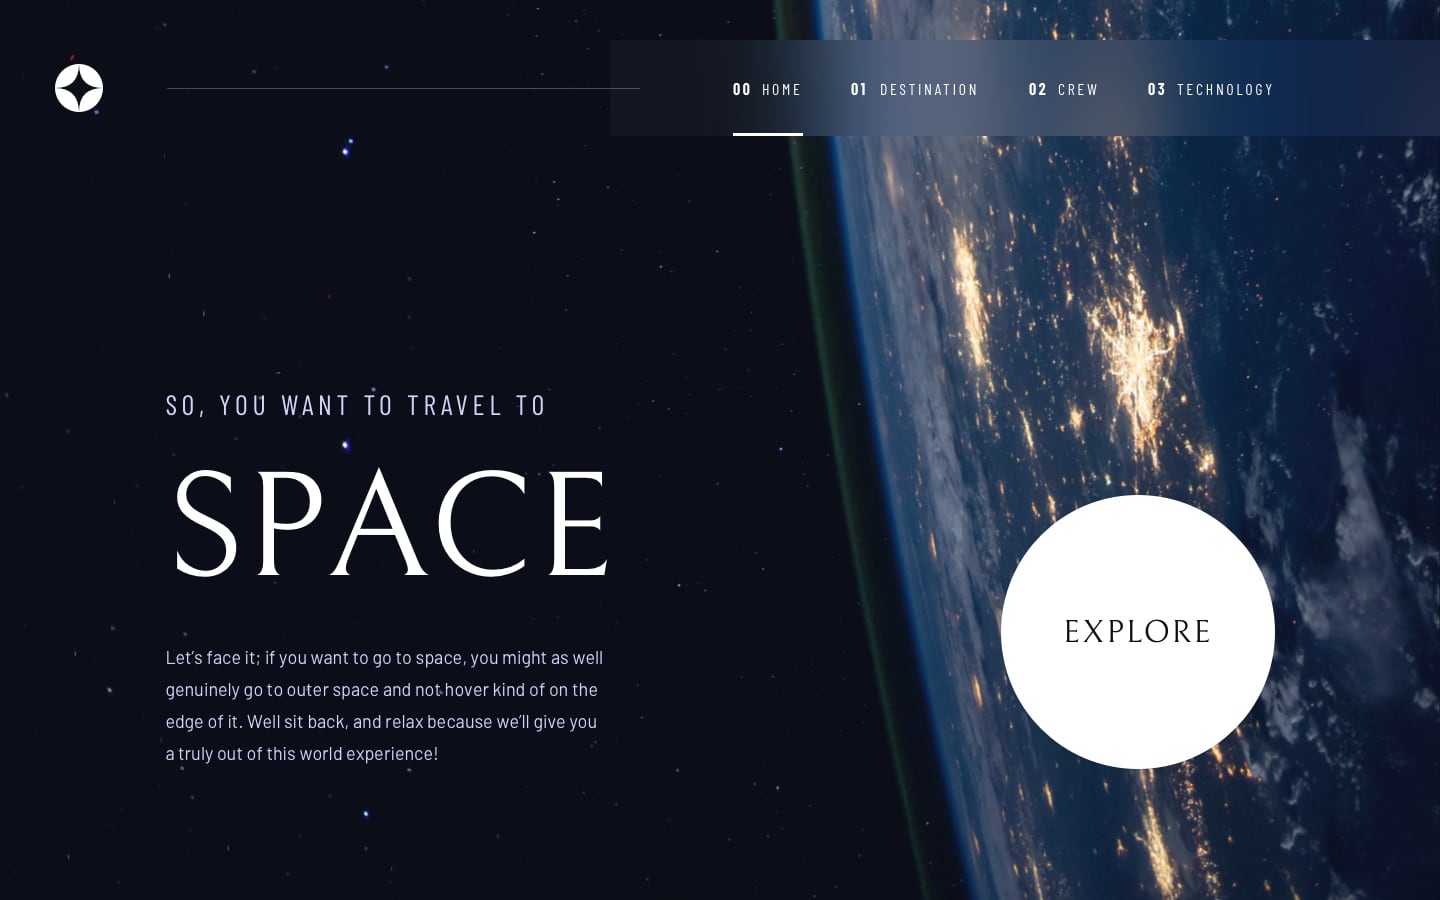 Snapshot of a website for space tourism